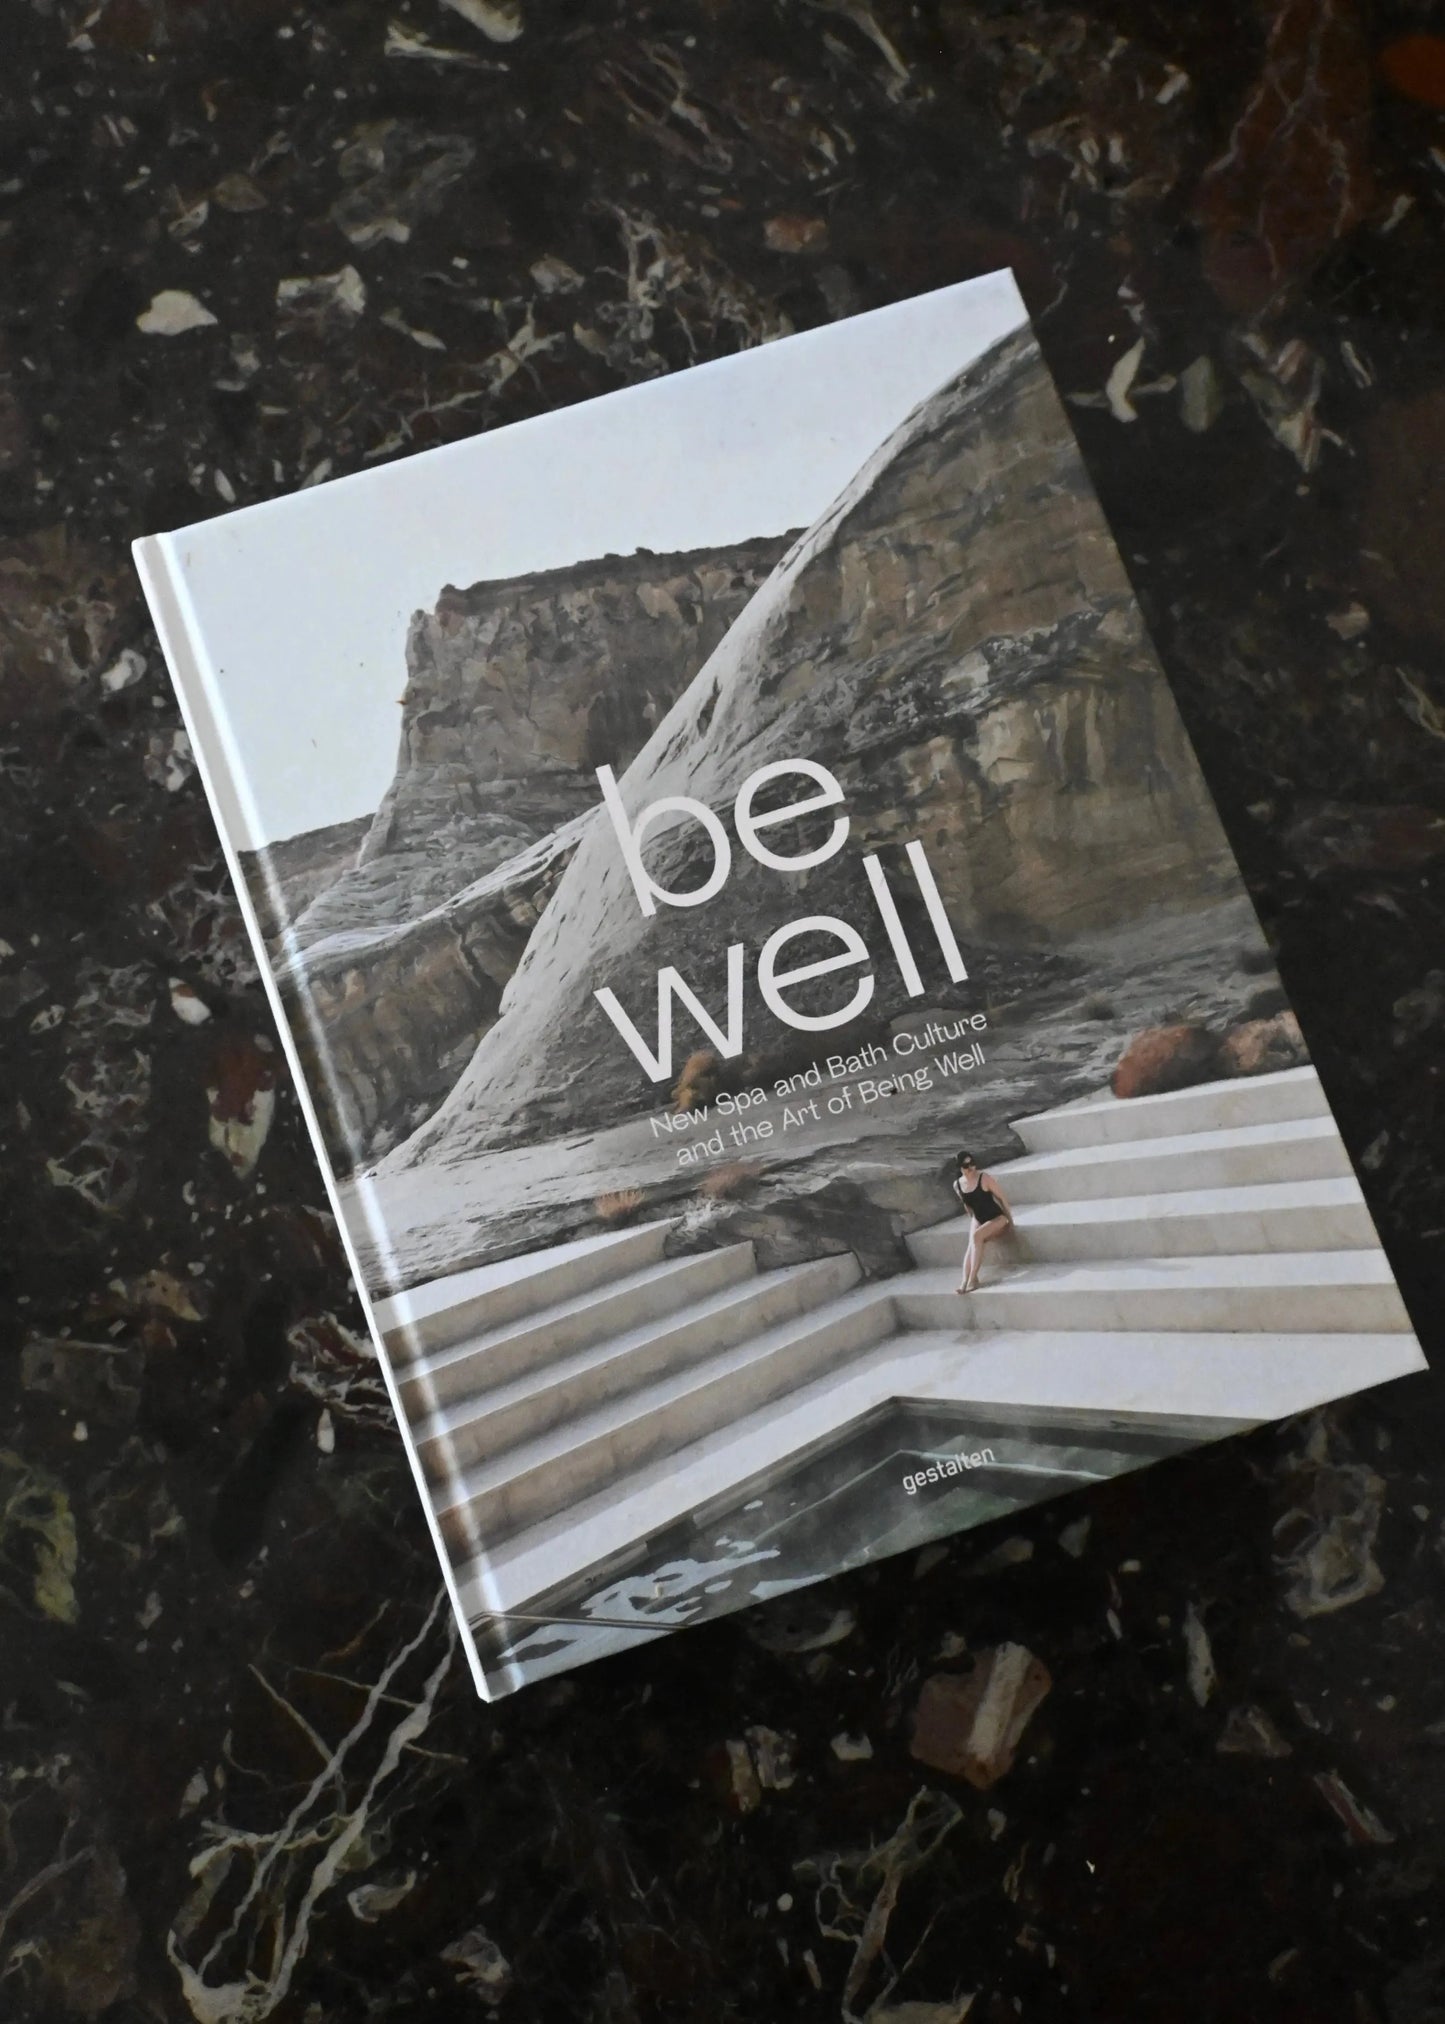 Be Well: New Spa and Bath Culture Book